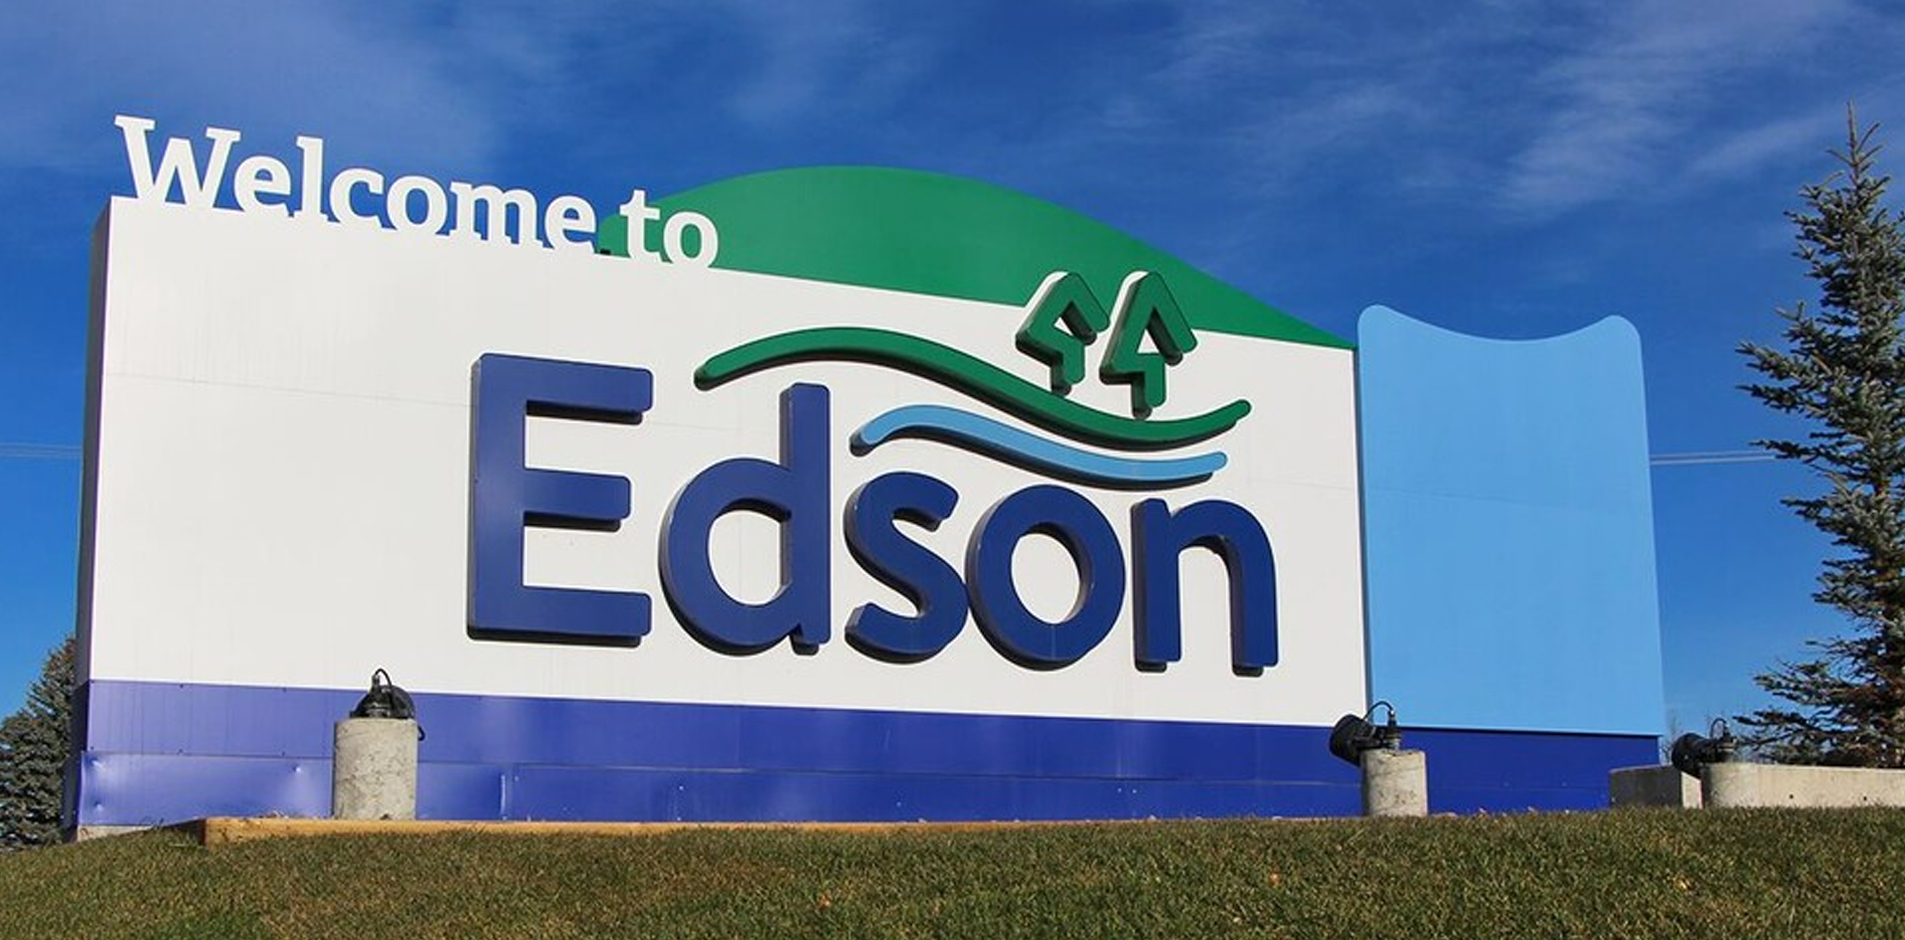 Town of Edson